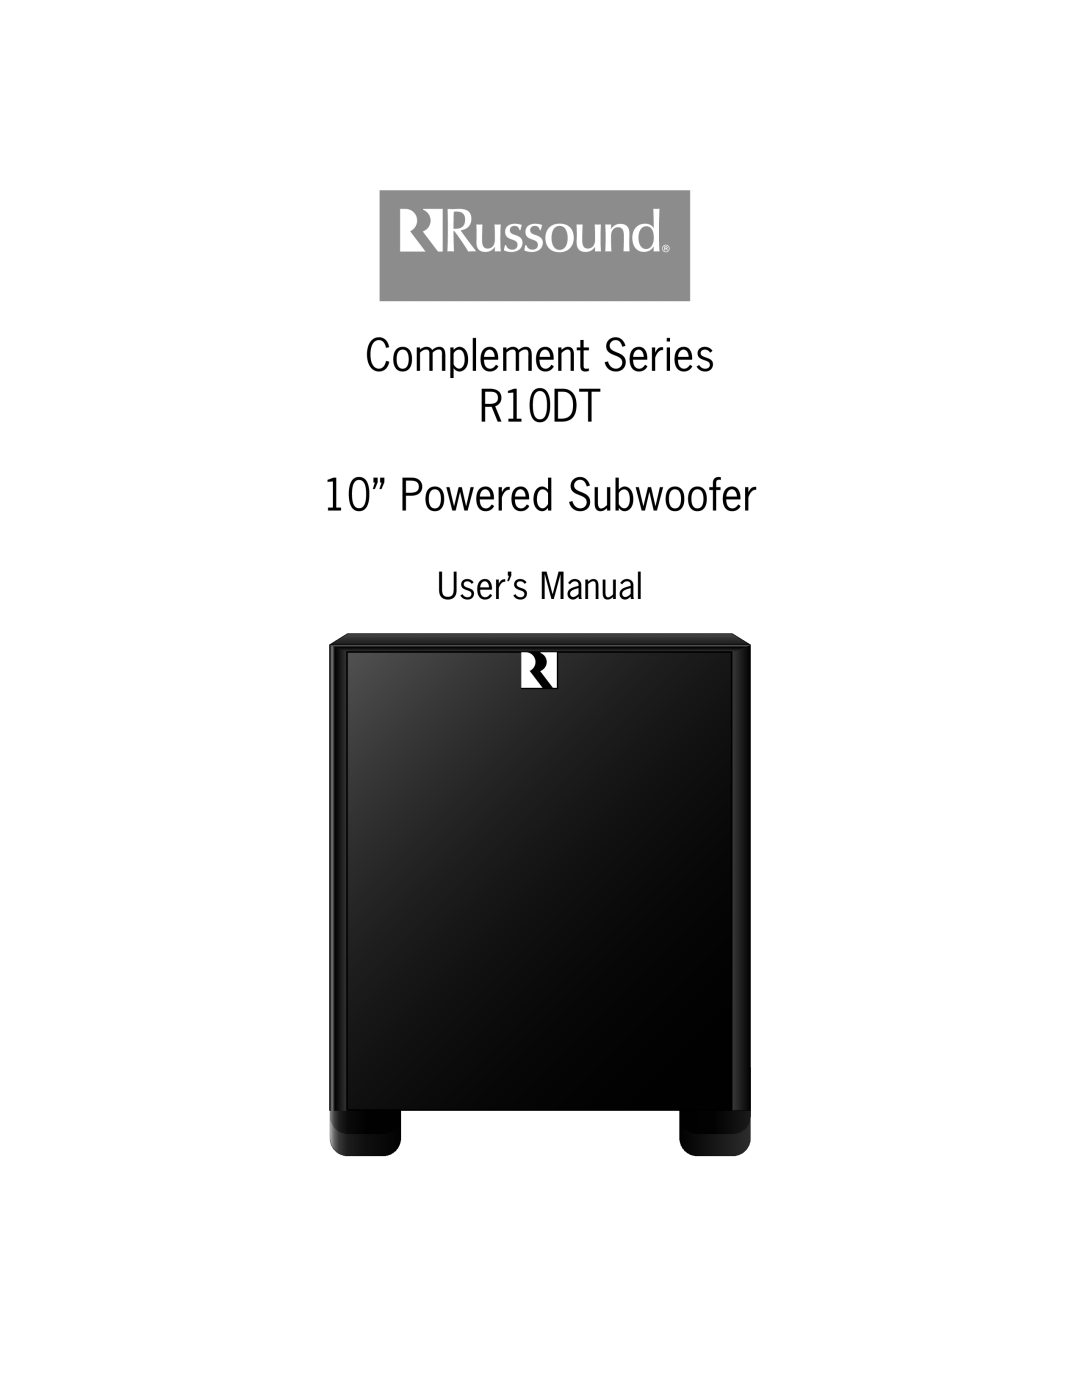 Russound user manual Complement Series R10DT 10” Powered Subwoofer 